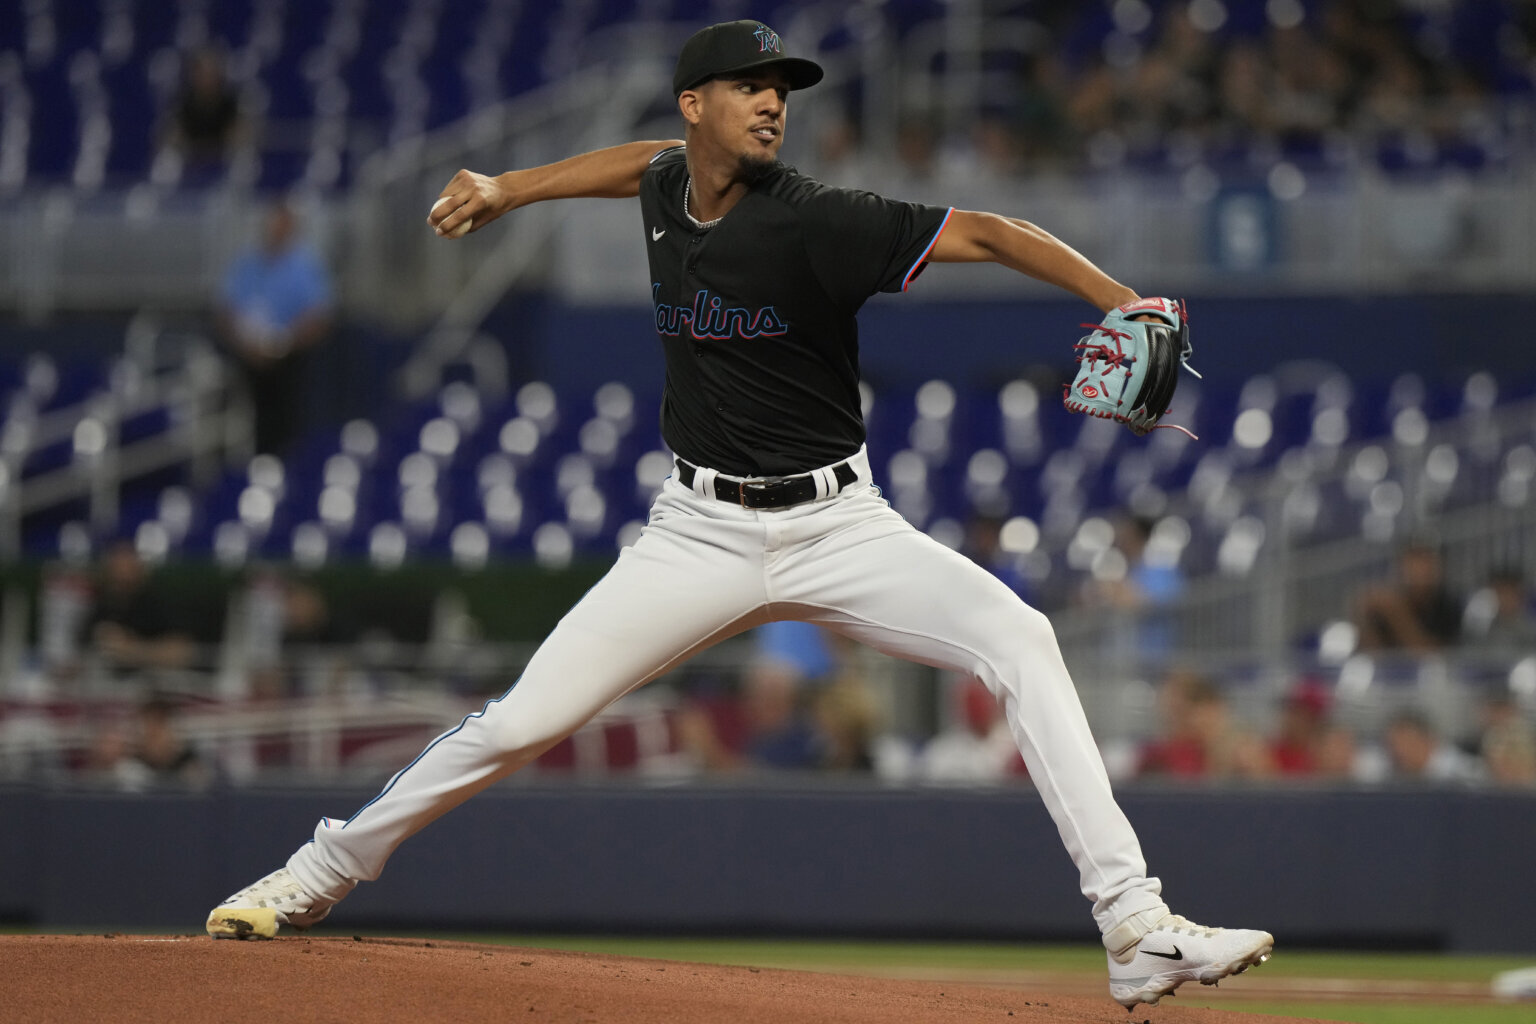 Marlins make it official, put RHP Eury Perez on active roster